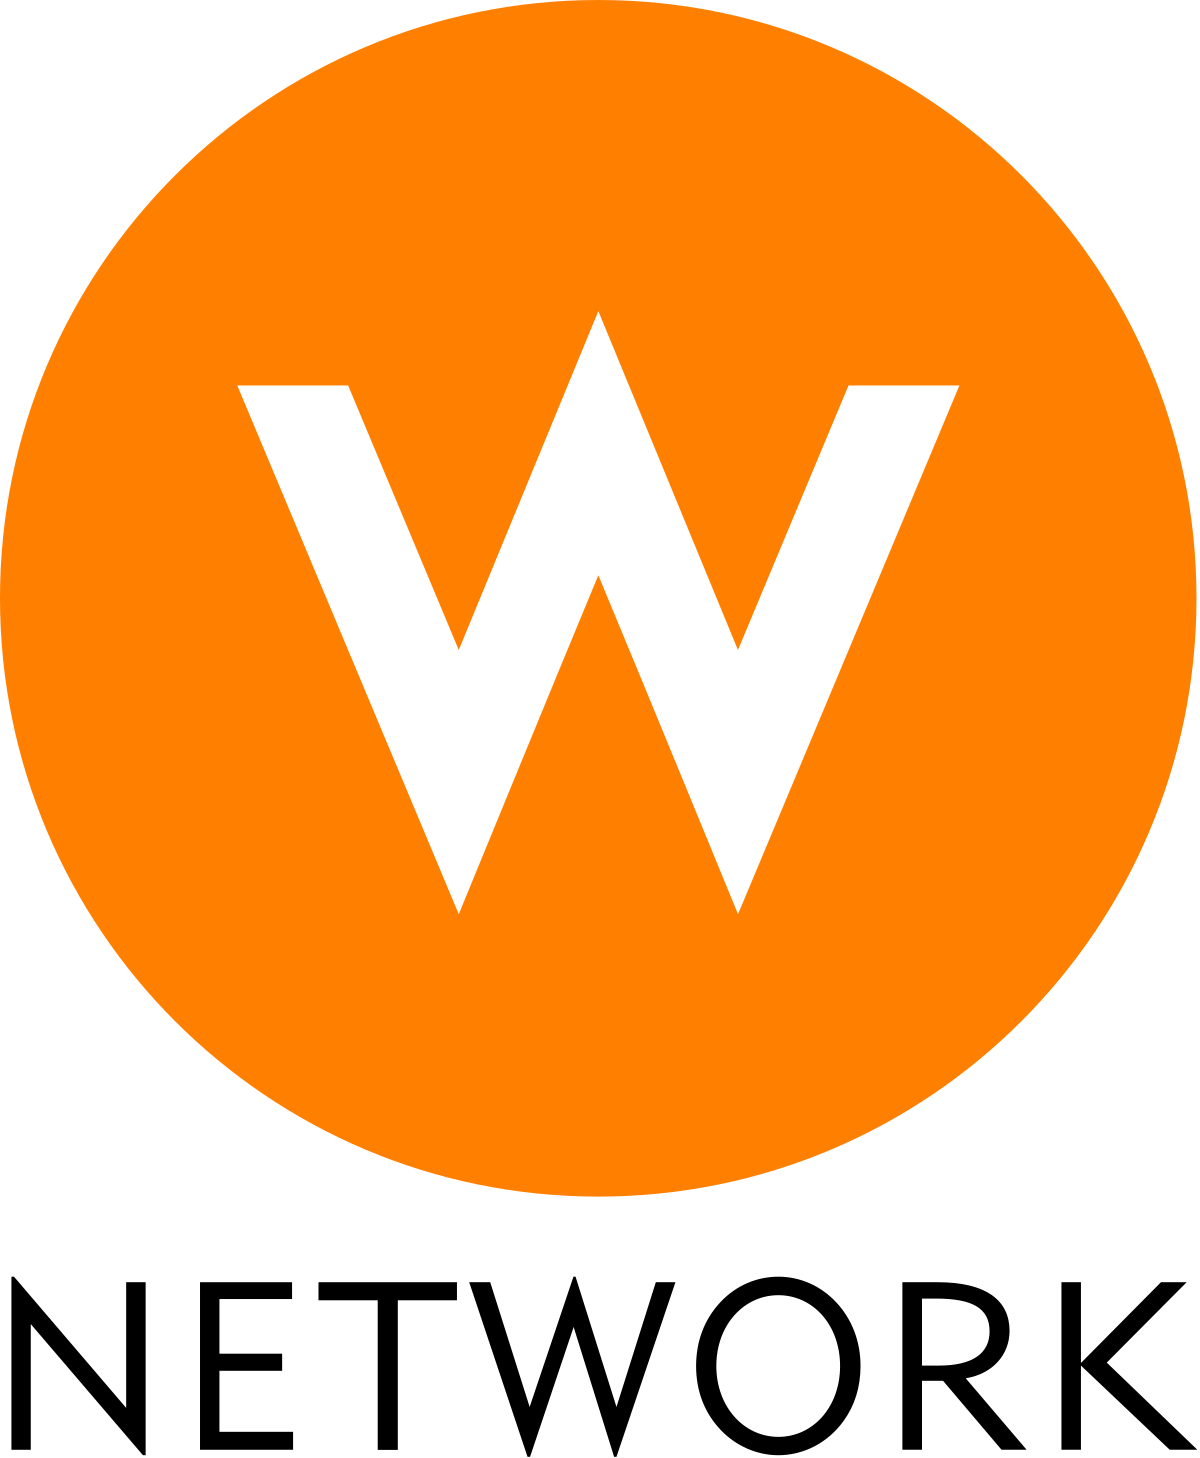 The W Network